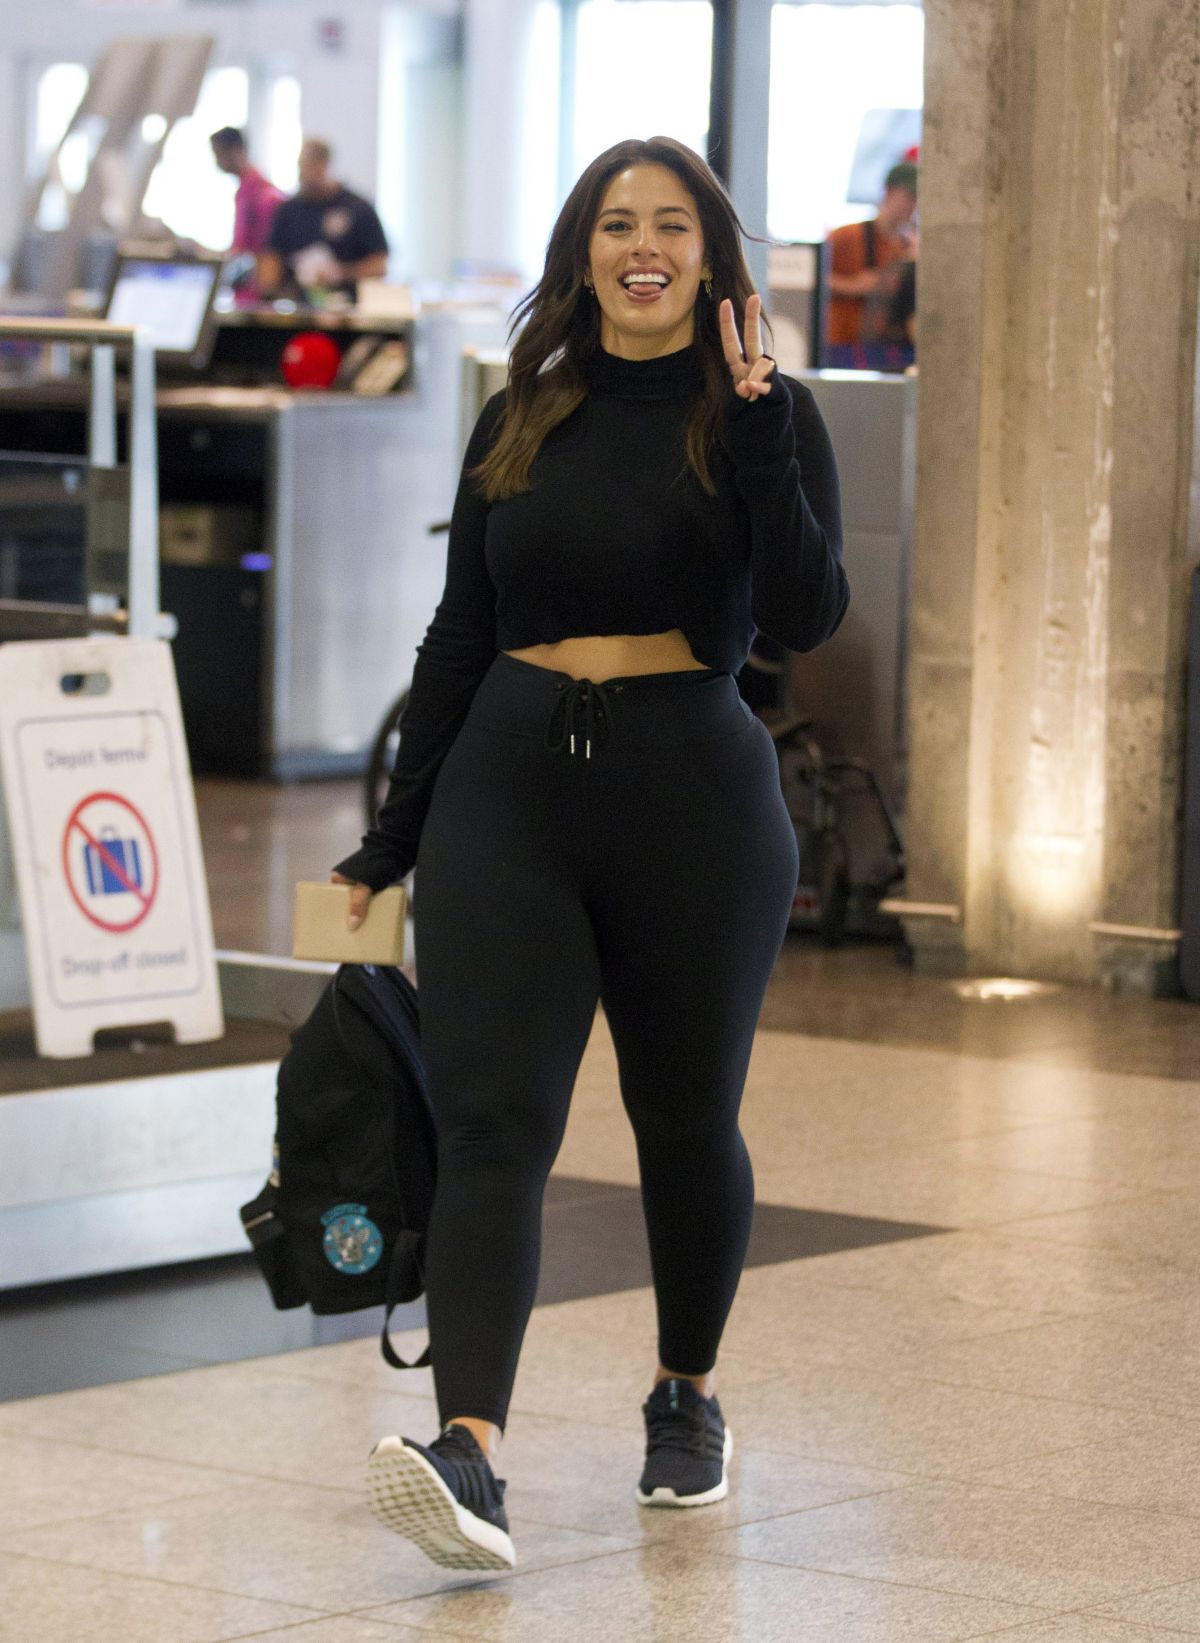 ashley-graham-arrives-at-airport-in-montreal-06-26-2018-2.jpg